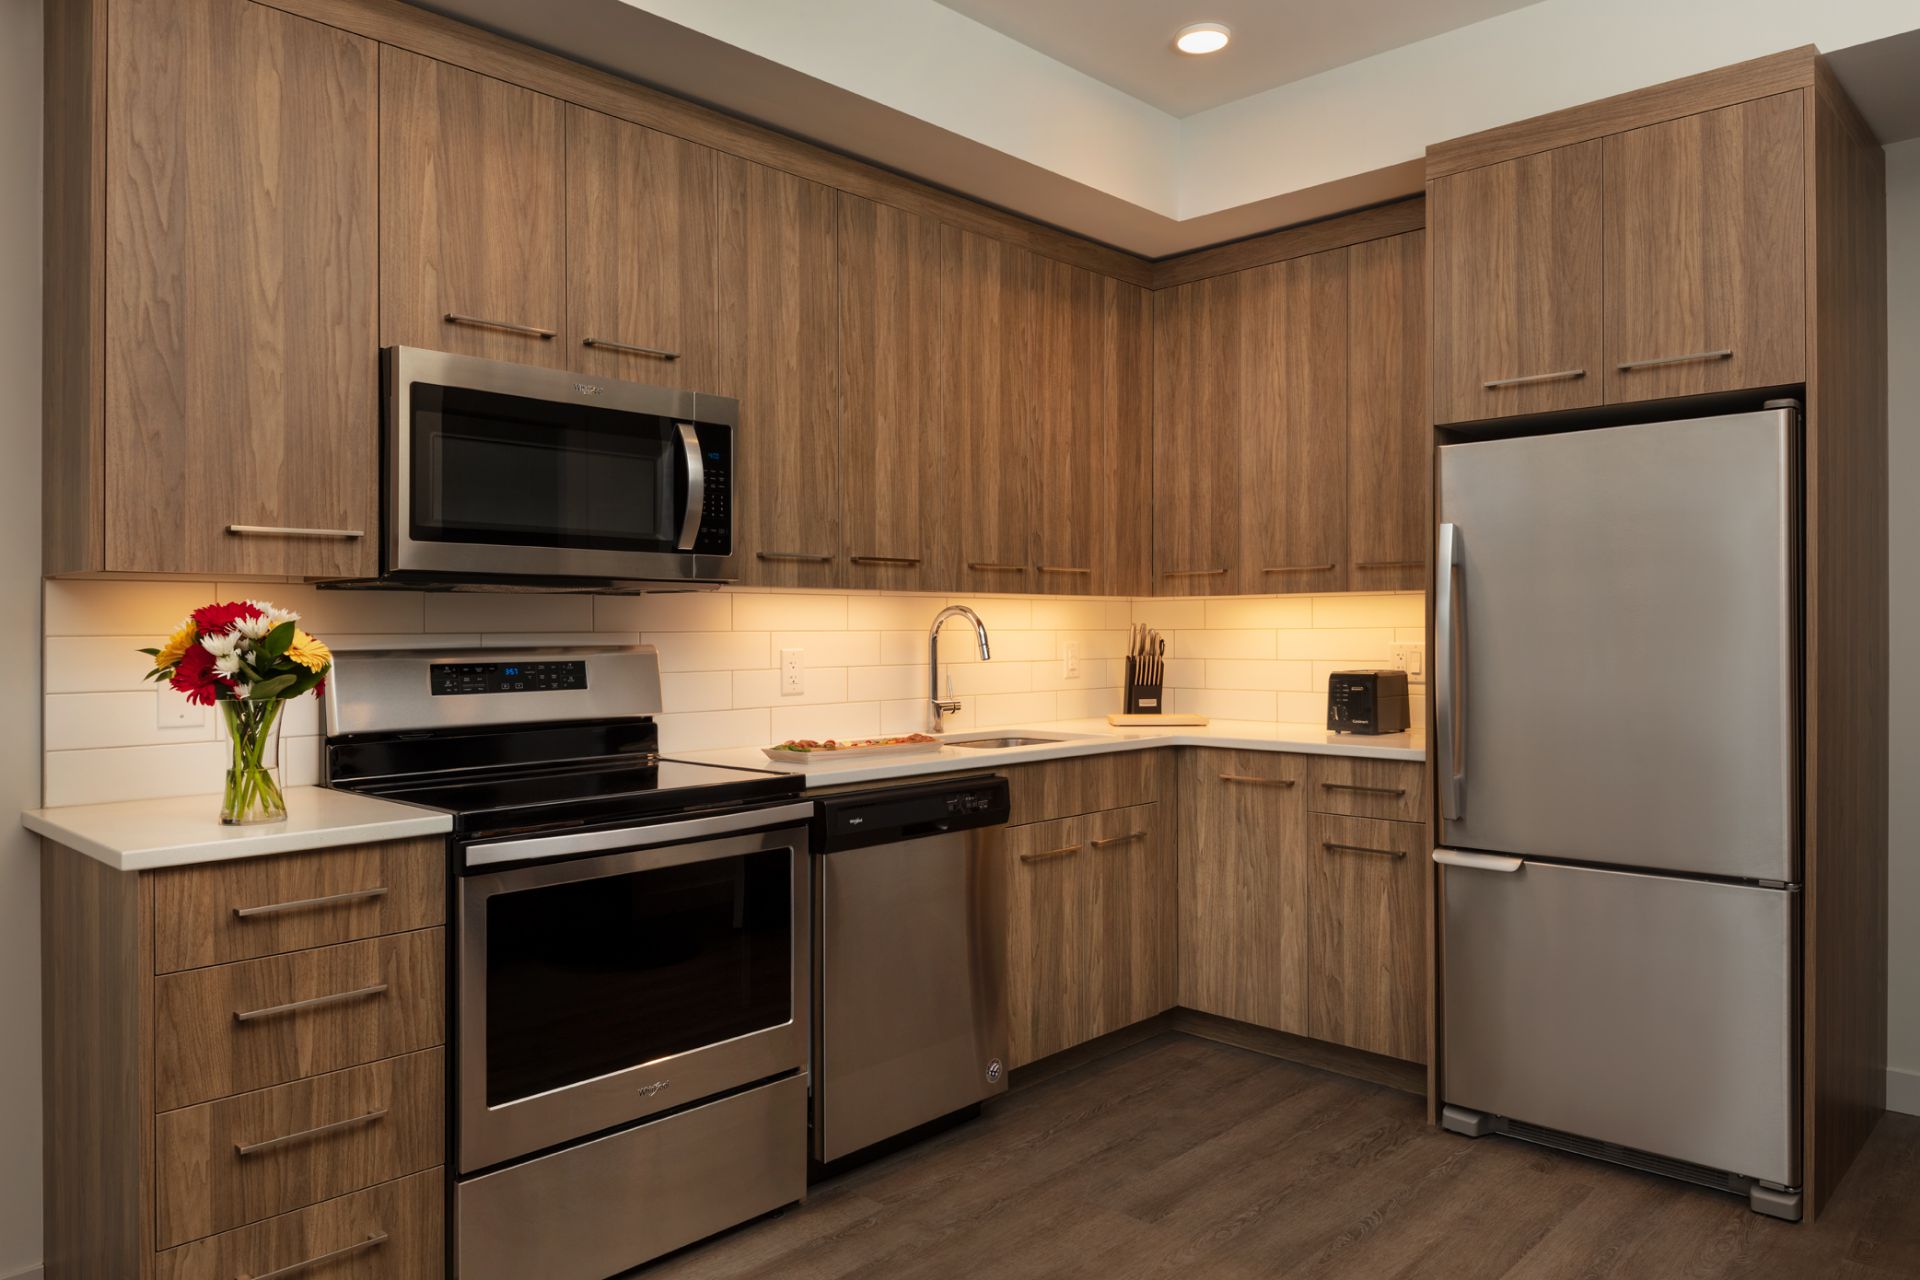 The Shore Kelowna 1 Bedroom plus Den Suite Kitchen with wood cabinets and stainless steel appliances, a vase of flowers on the countertop